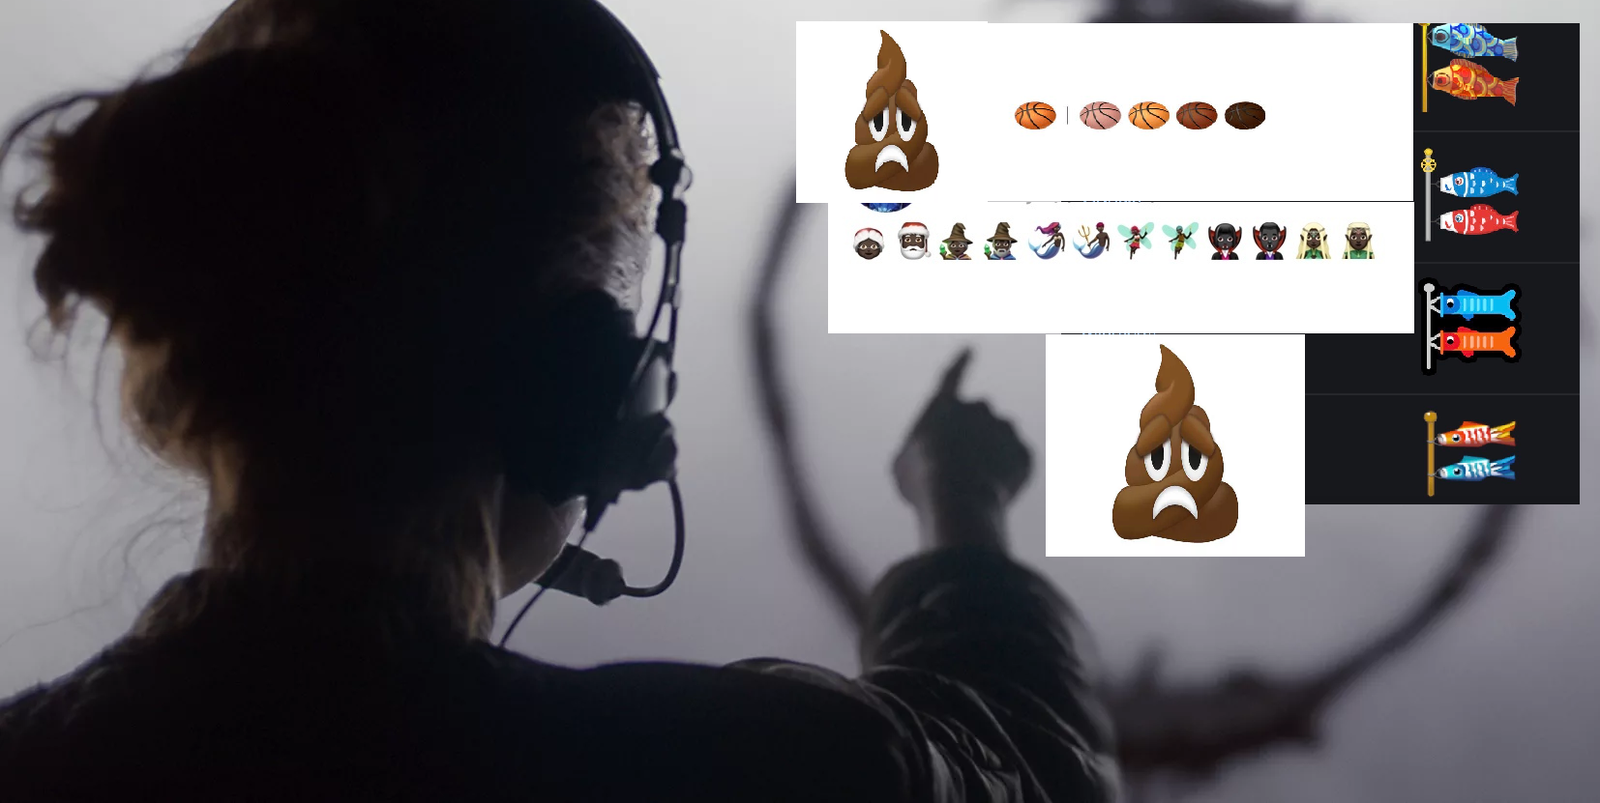 When you read a message consisting entirely of emoji (and a little reflection on the movie Arrival). - My, Arrival, Humor, Emoji, Longpost